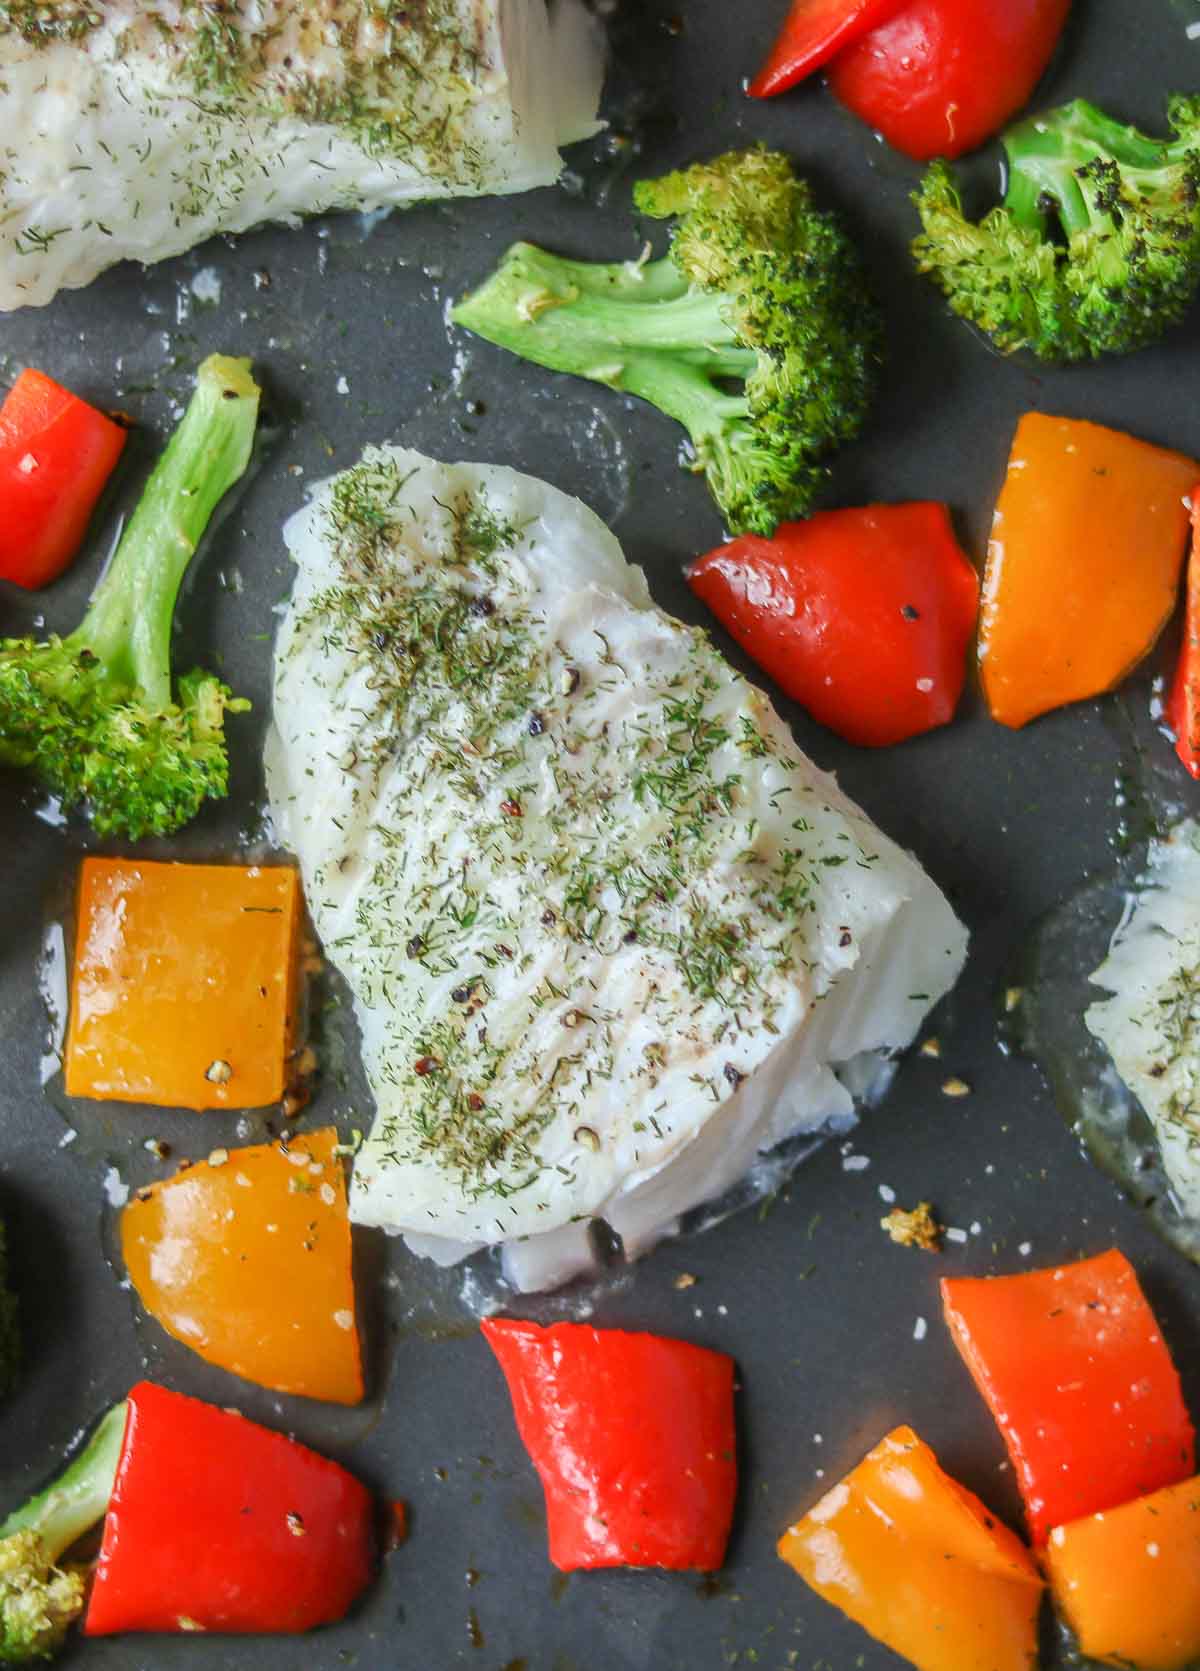 Portions of oven-baked cod and vegetables on a sheet pan.